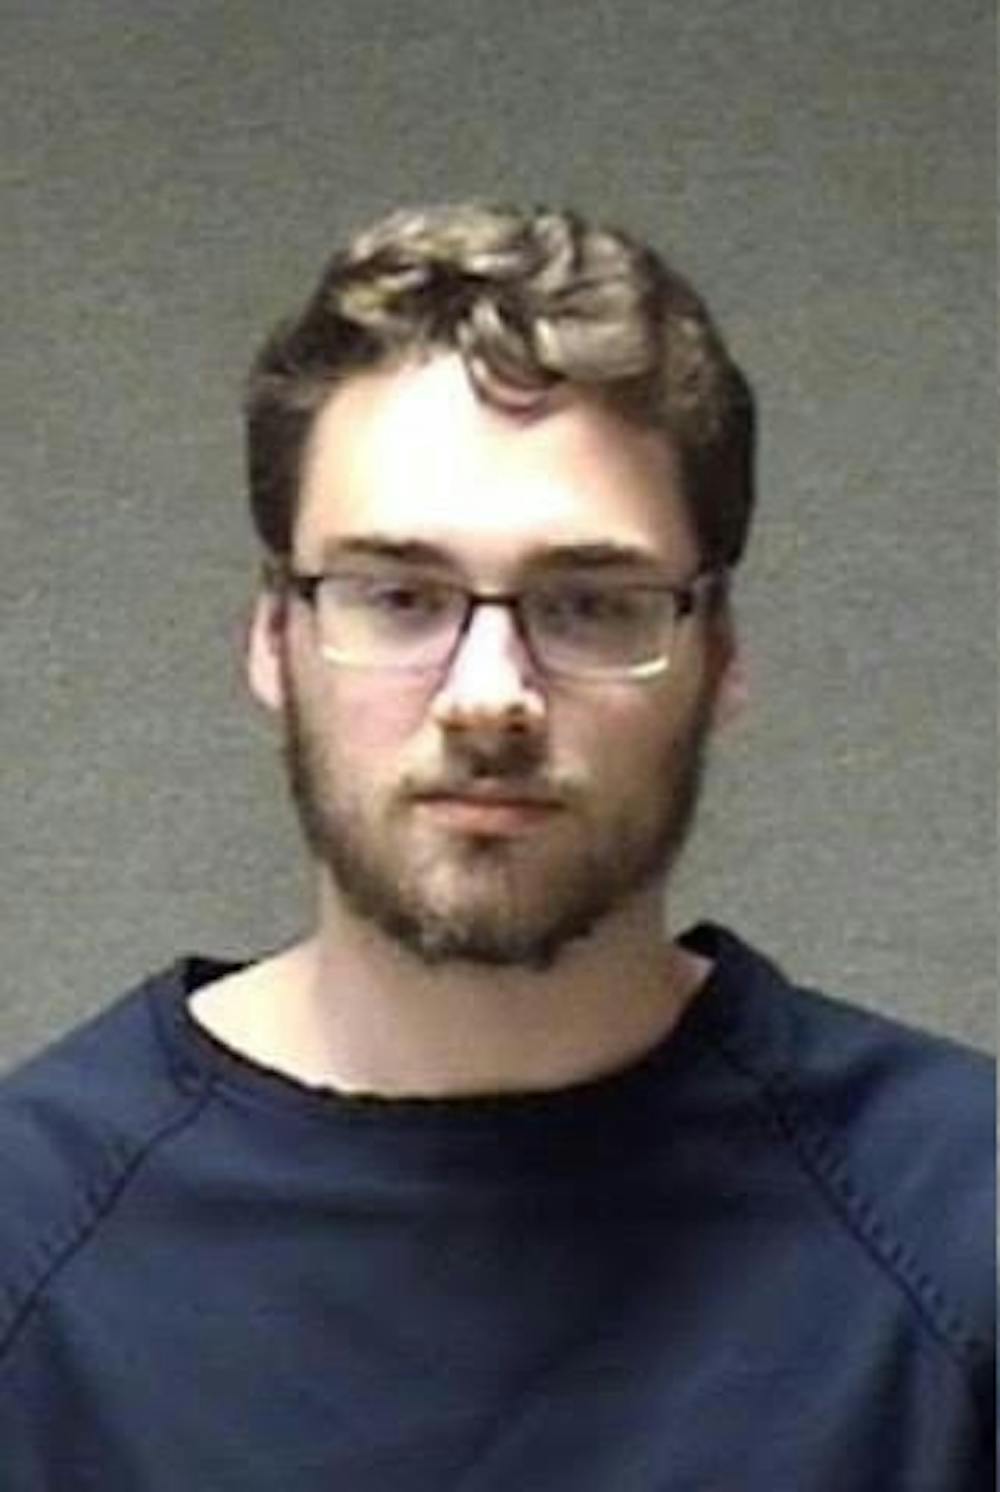 Ball State student allegedly raped in dorm room